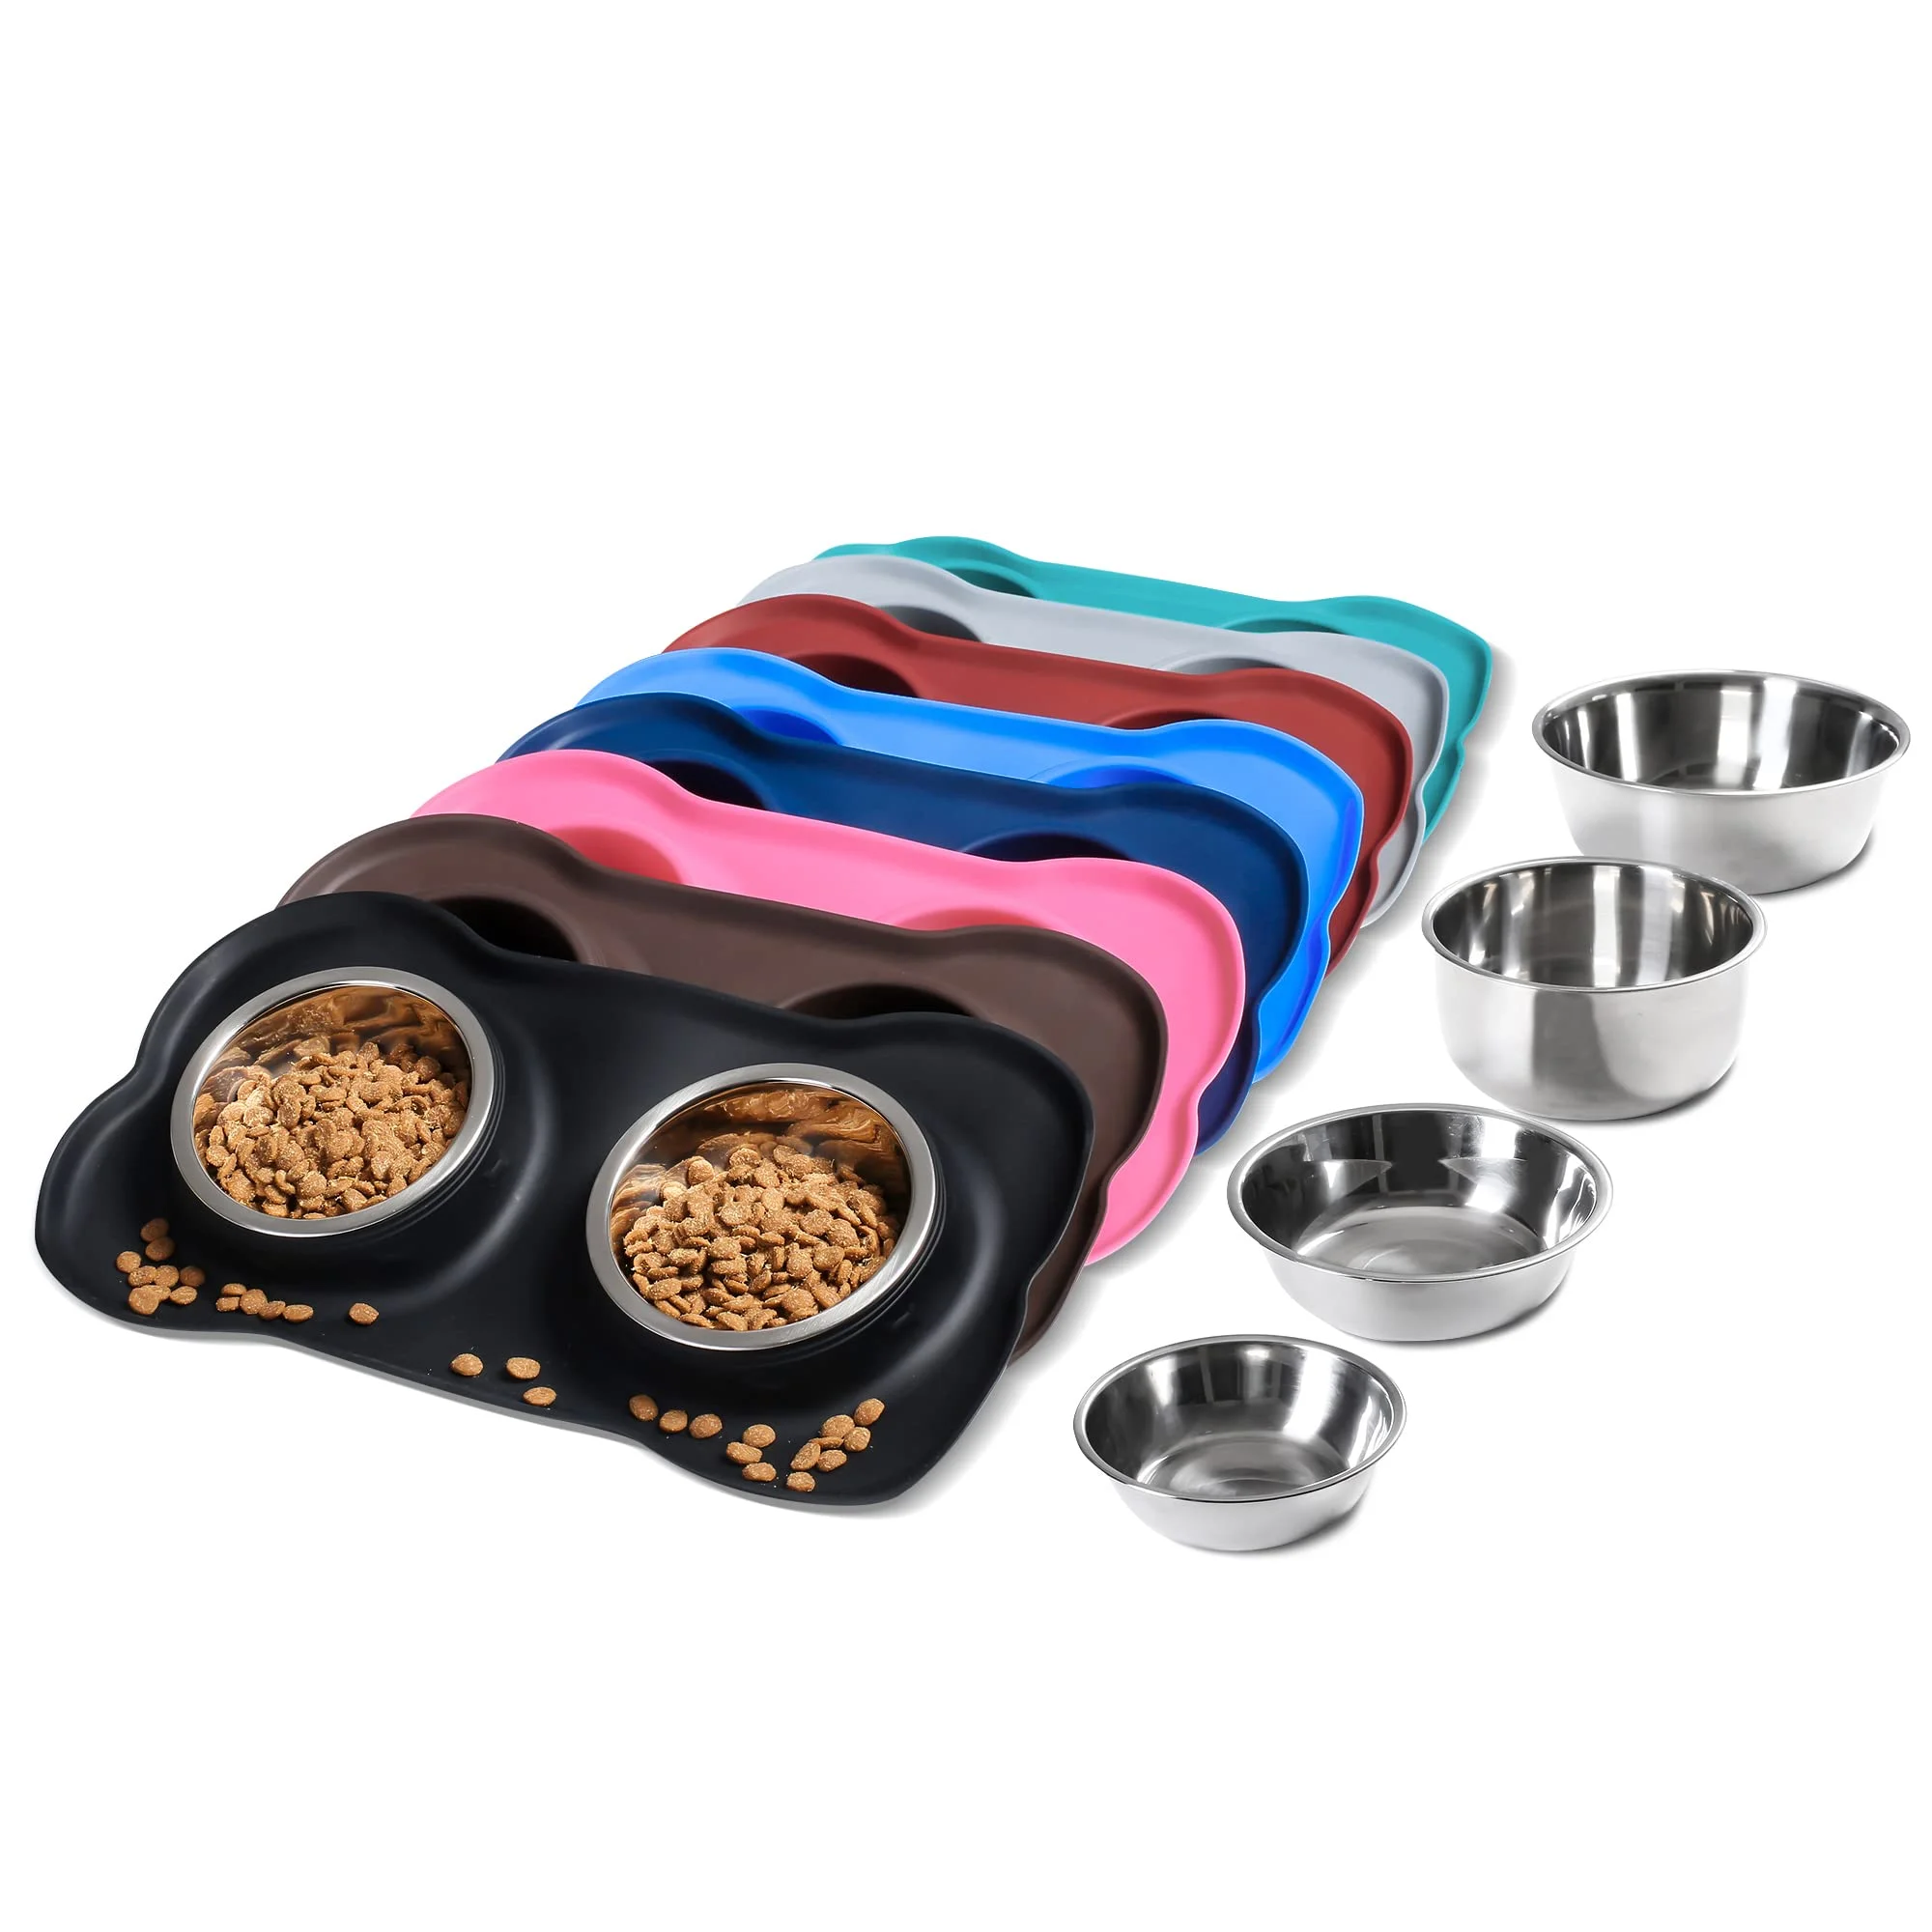 Pet Dog Bowls 2 Stainless Steel Dog Bowl with No Spill Non-Skid Silicone Mat Pet Food Scoop Water and Food Feeder Bowls